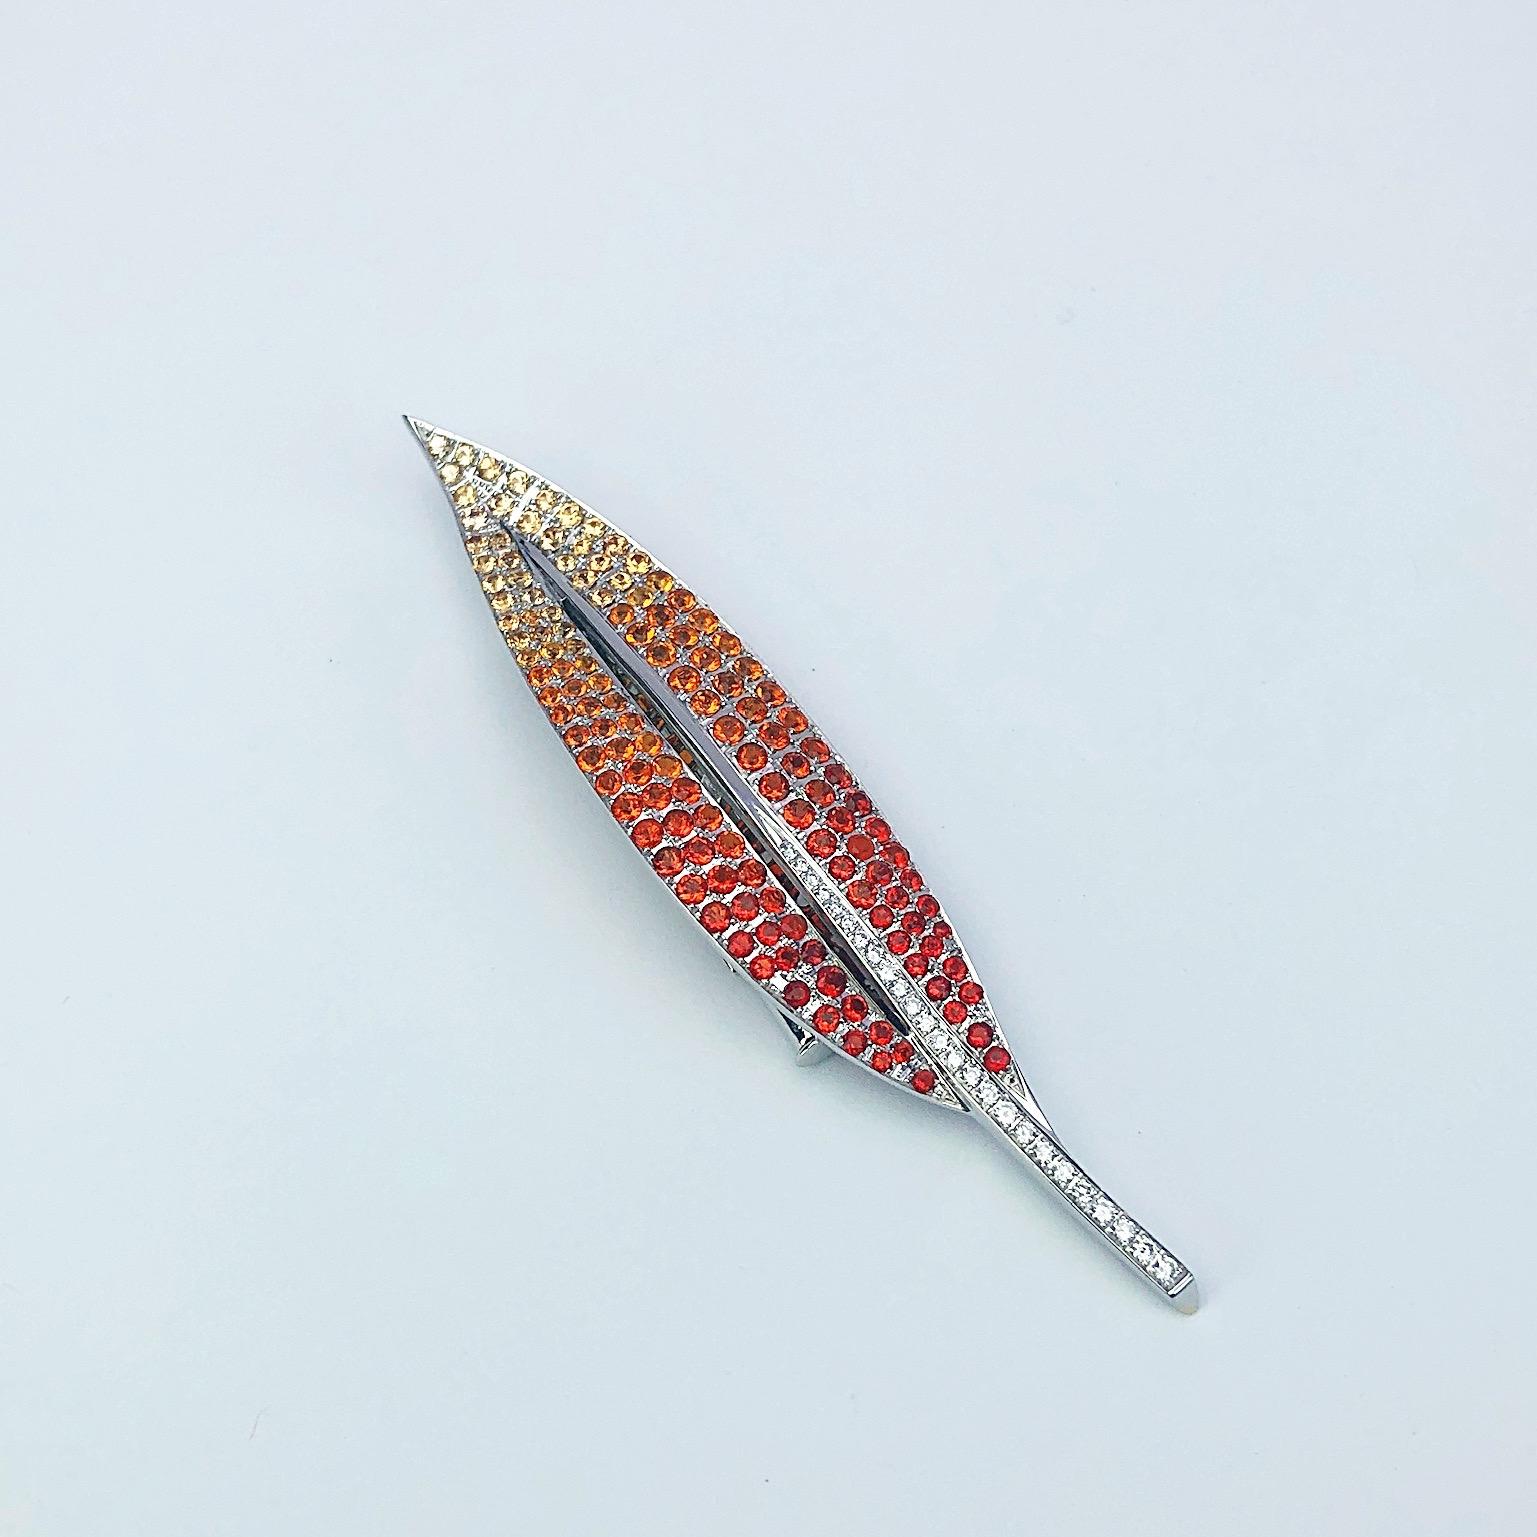 Magnificent 18 karat white gold leaf brooch set with a beautiful palette of ombre' stones. Starting with deep orange fire opals transitioning to lighter shades of yellow sapphires. A row of white diamonds are set in the stem. The brooch measures